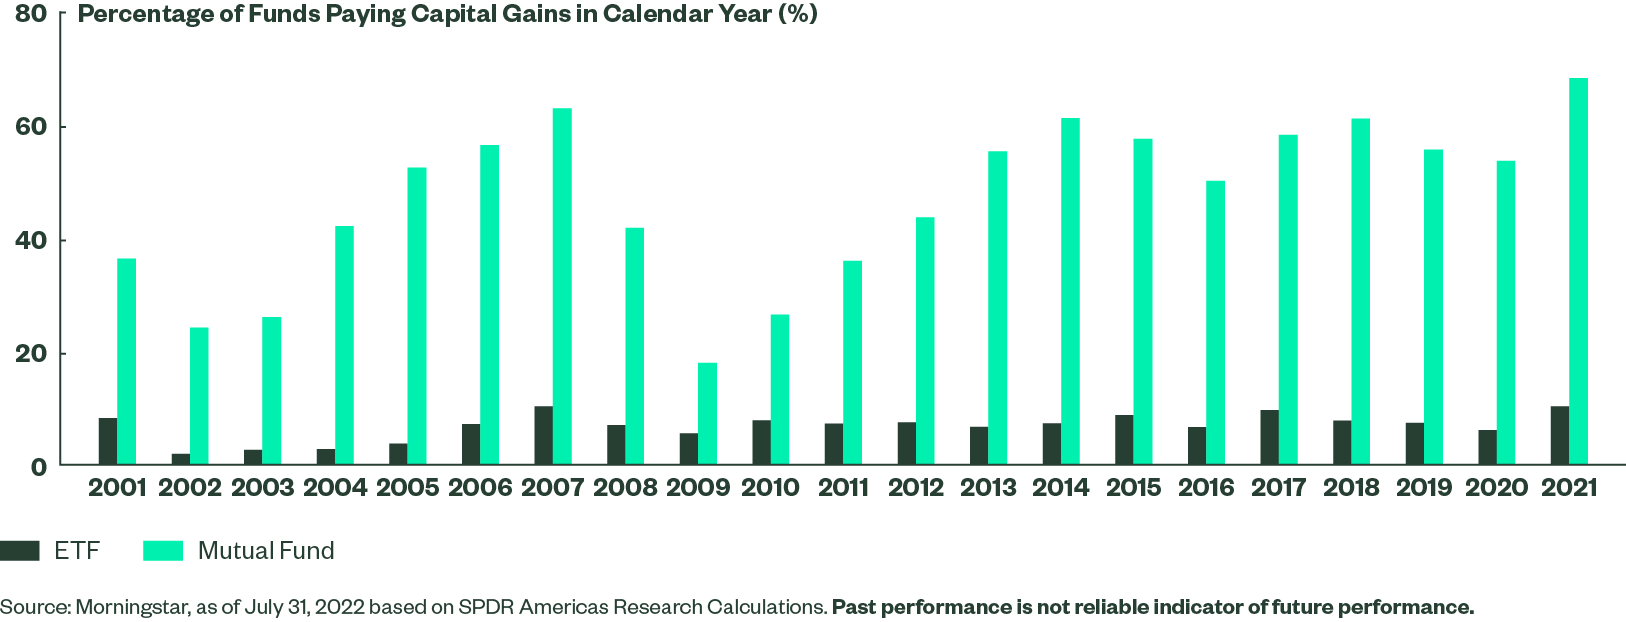 Percent of Funds Paying Capital Gains in Calendar Year 